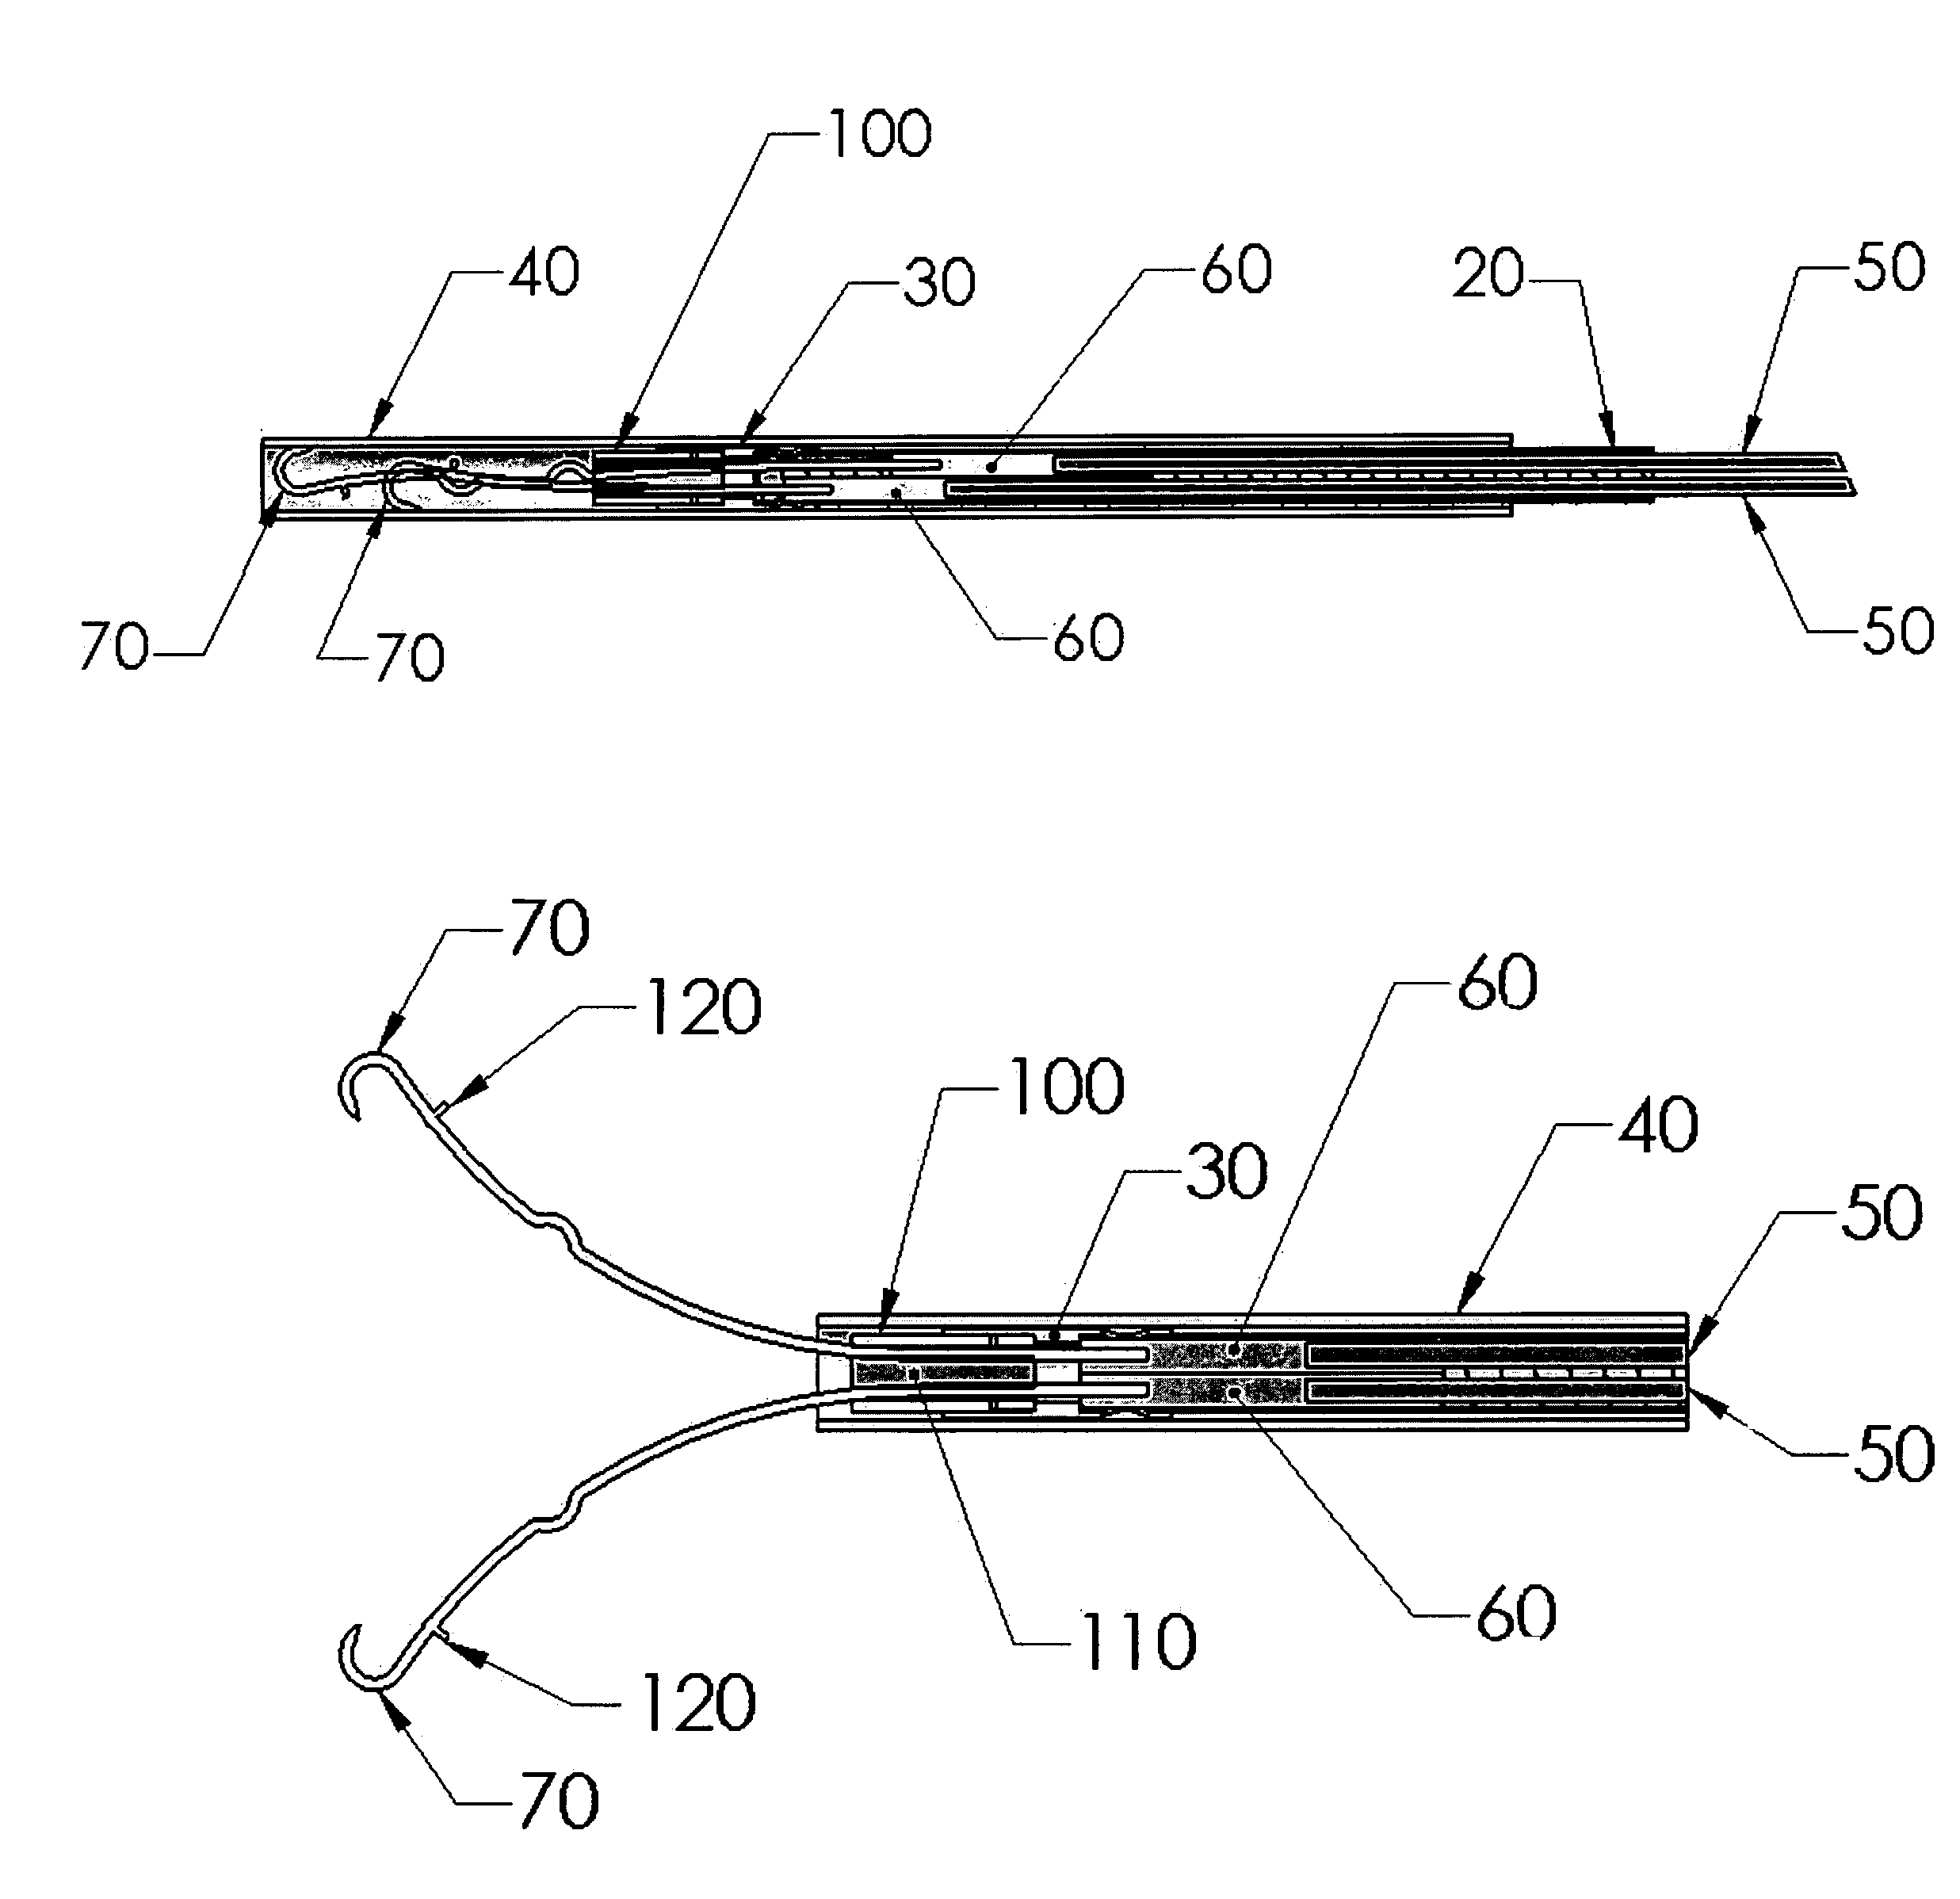 Endoscopic device with independently actuated legs